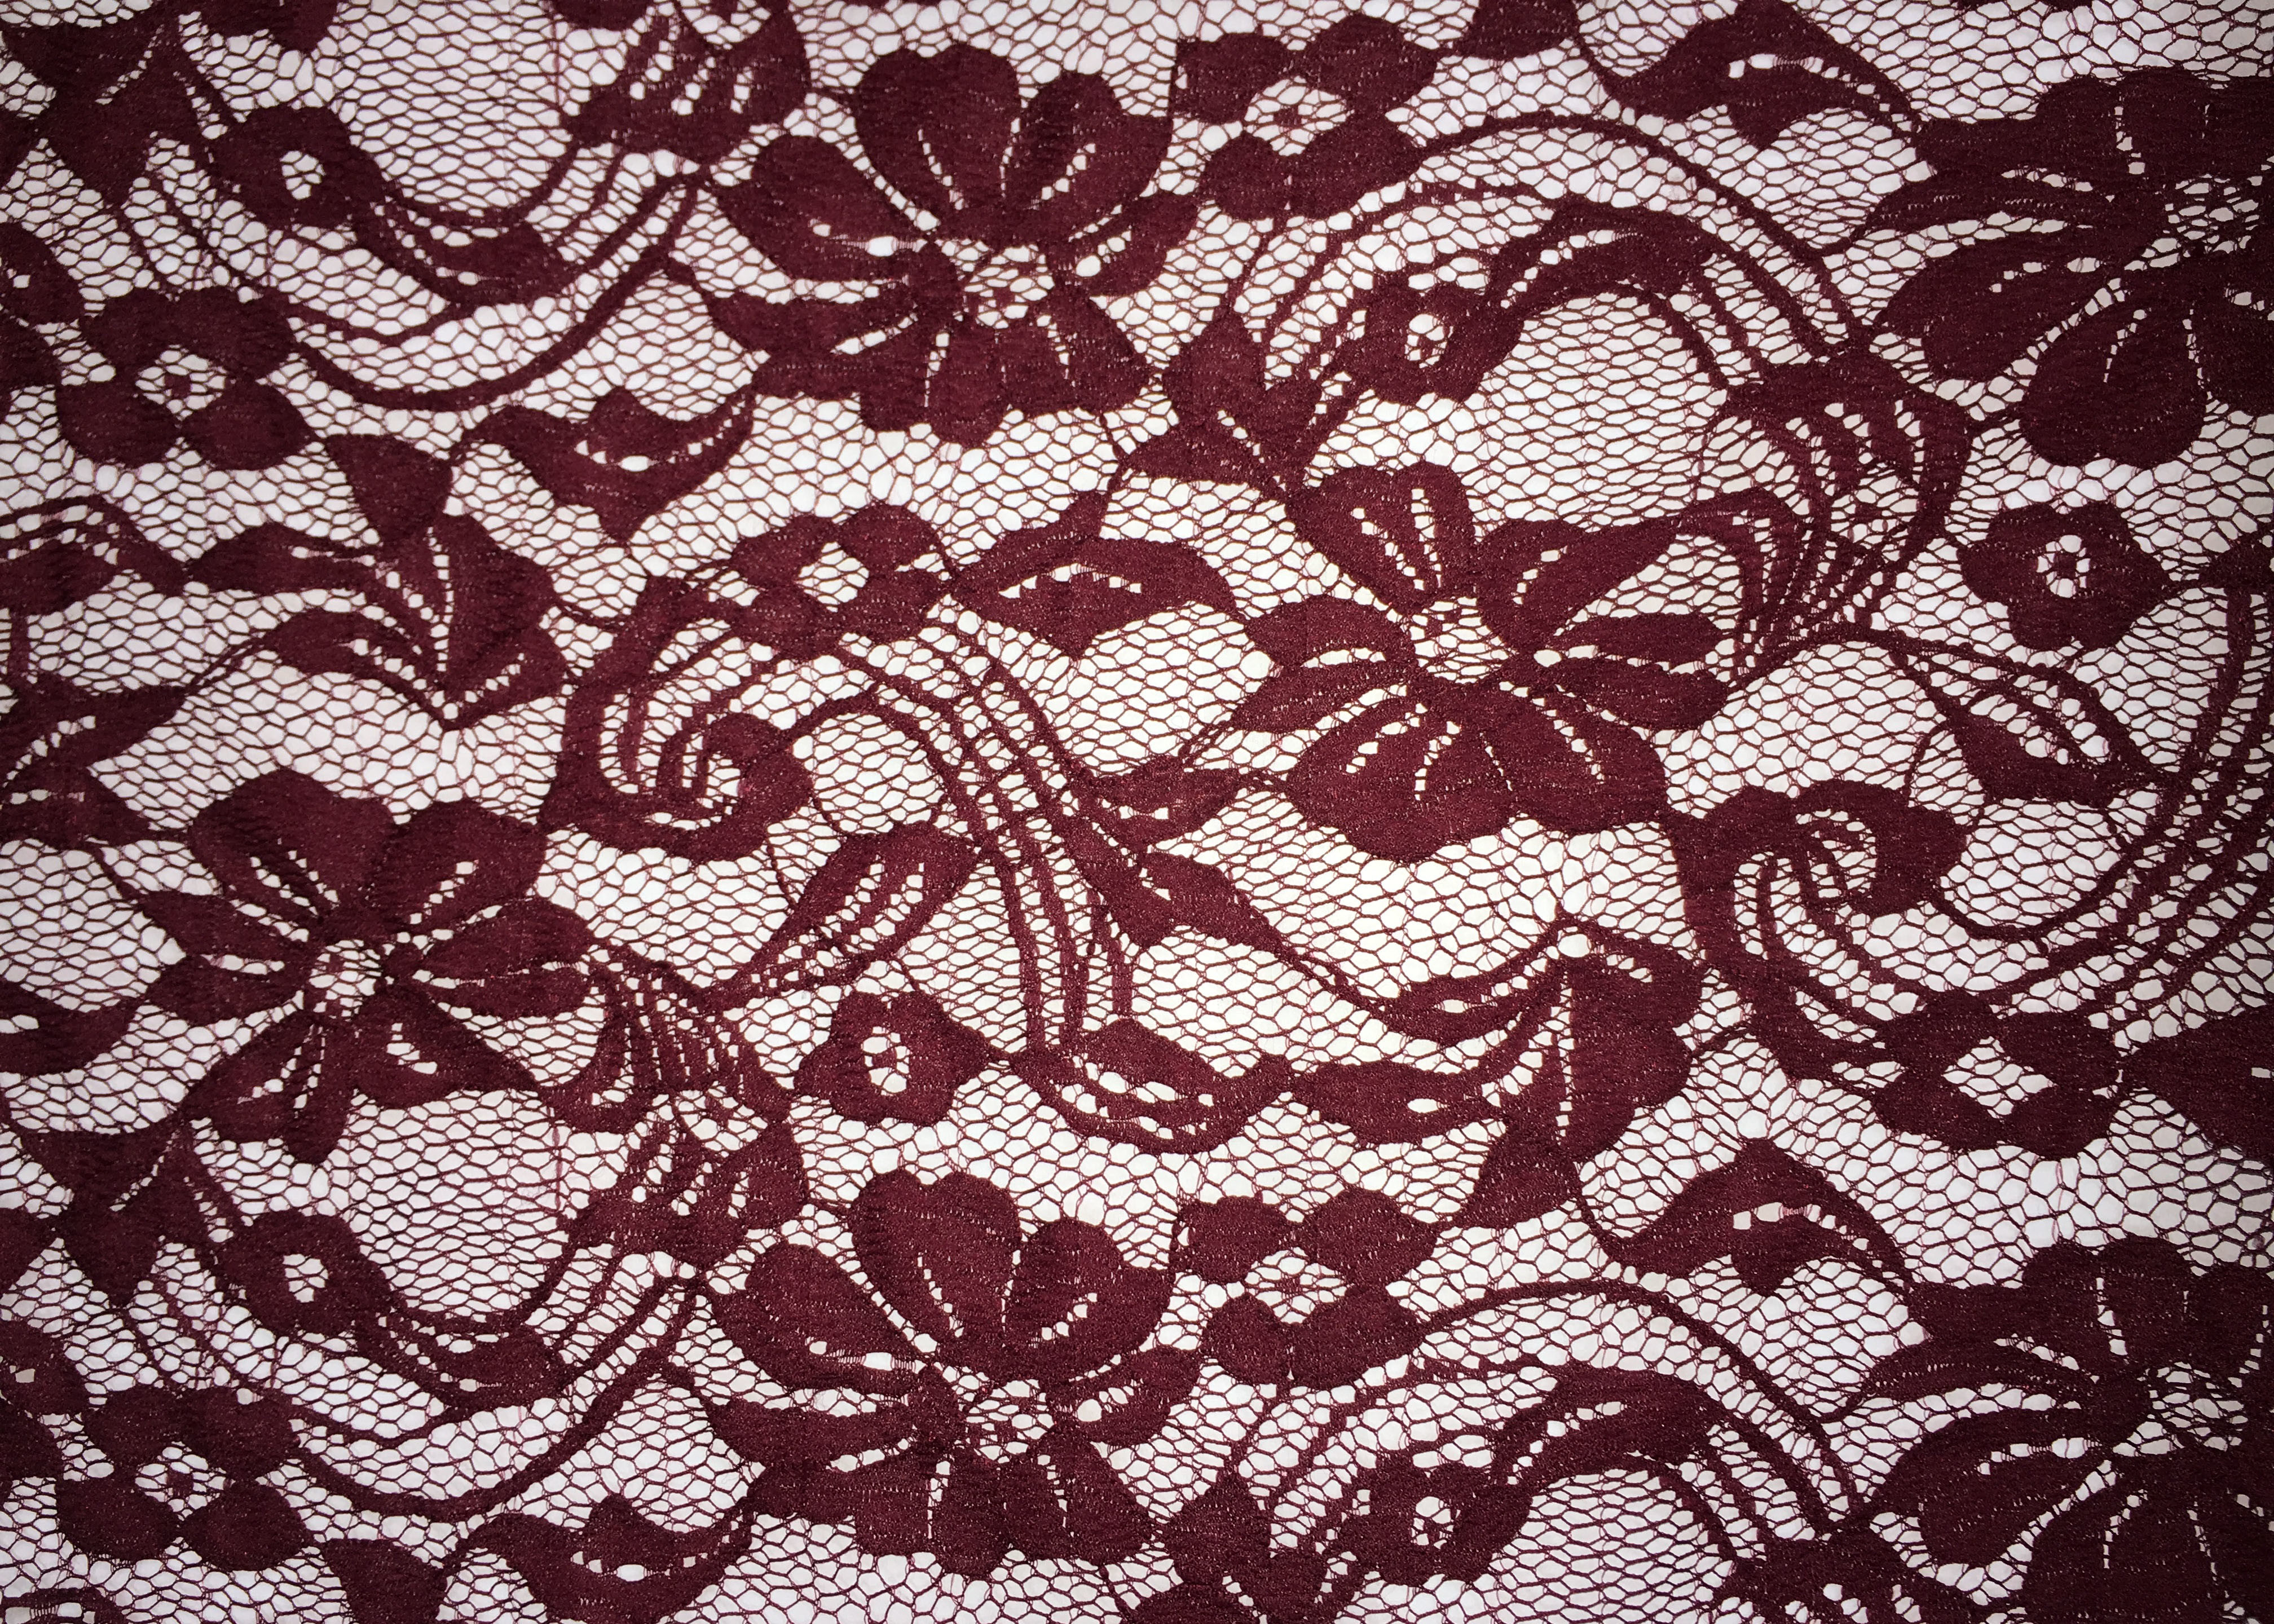  Beauty Chemical Lace Fabric / Cupion Lace Fabric With Polyester / Cotton Material Manufactures